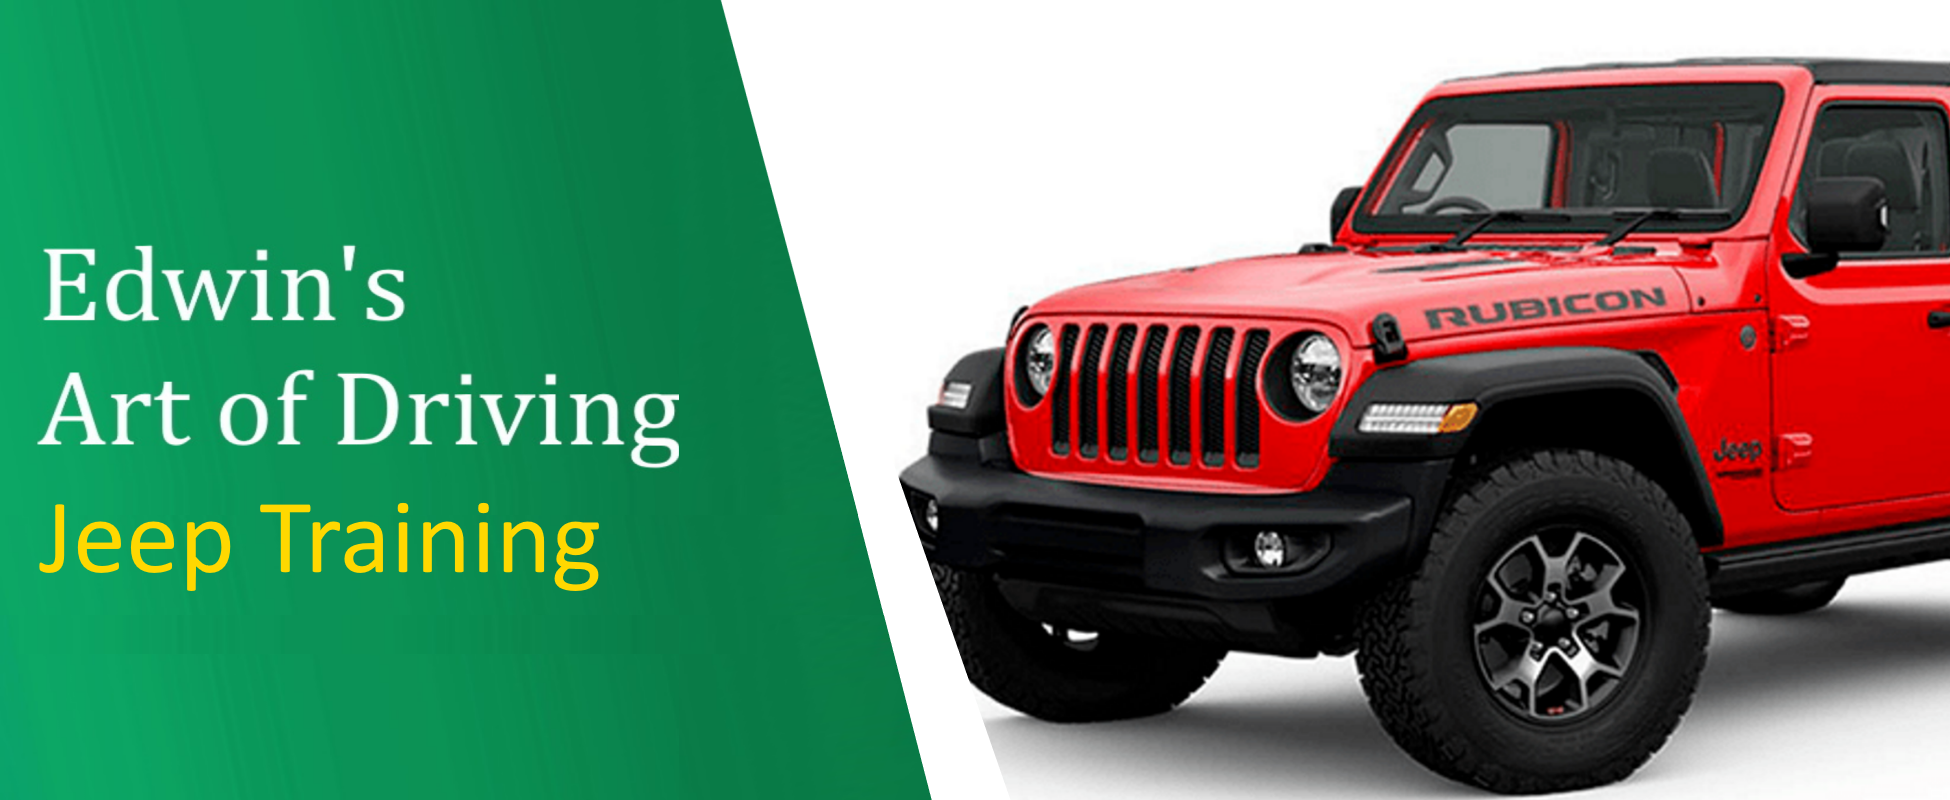 Jeep Driving School Near Me Jeep Driving Trainers/Instructors/classes